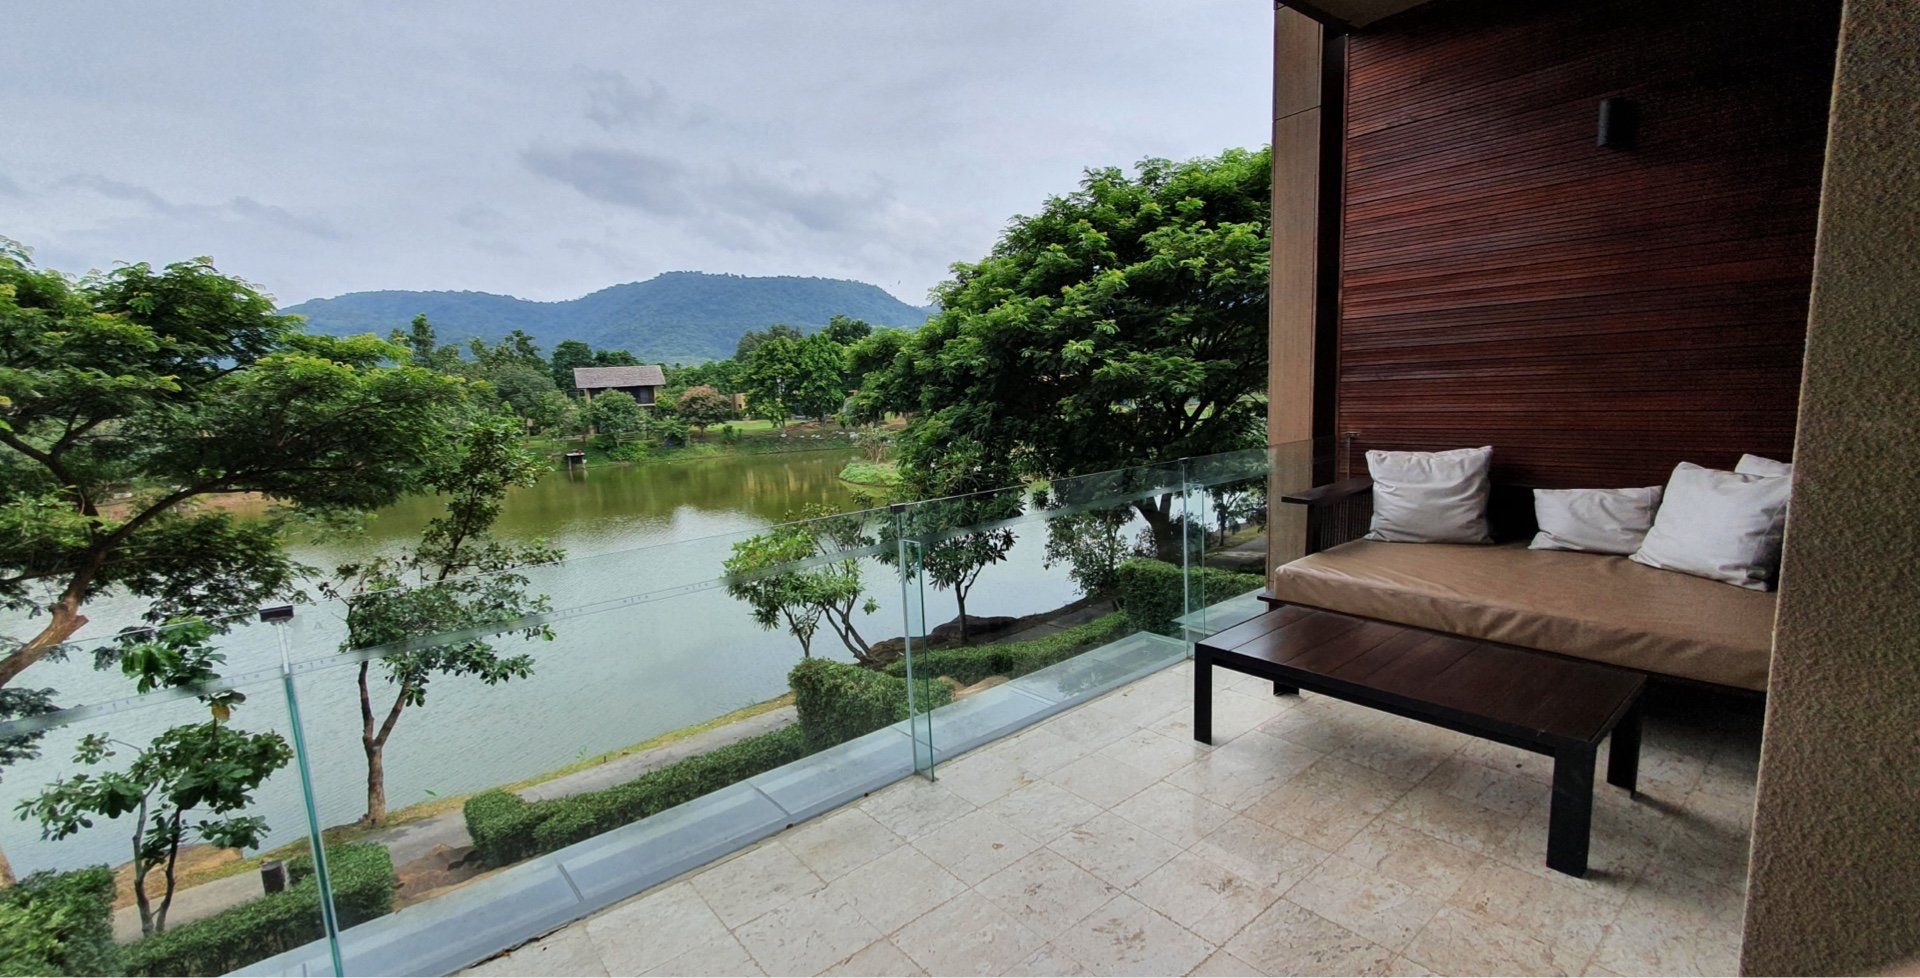 A balcony with a couch and a view of a lake.